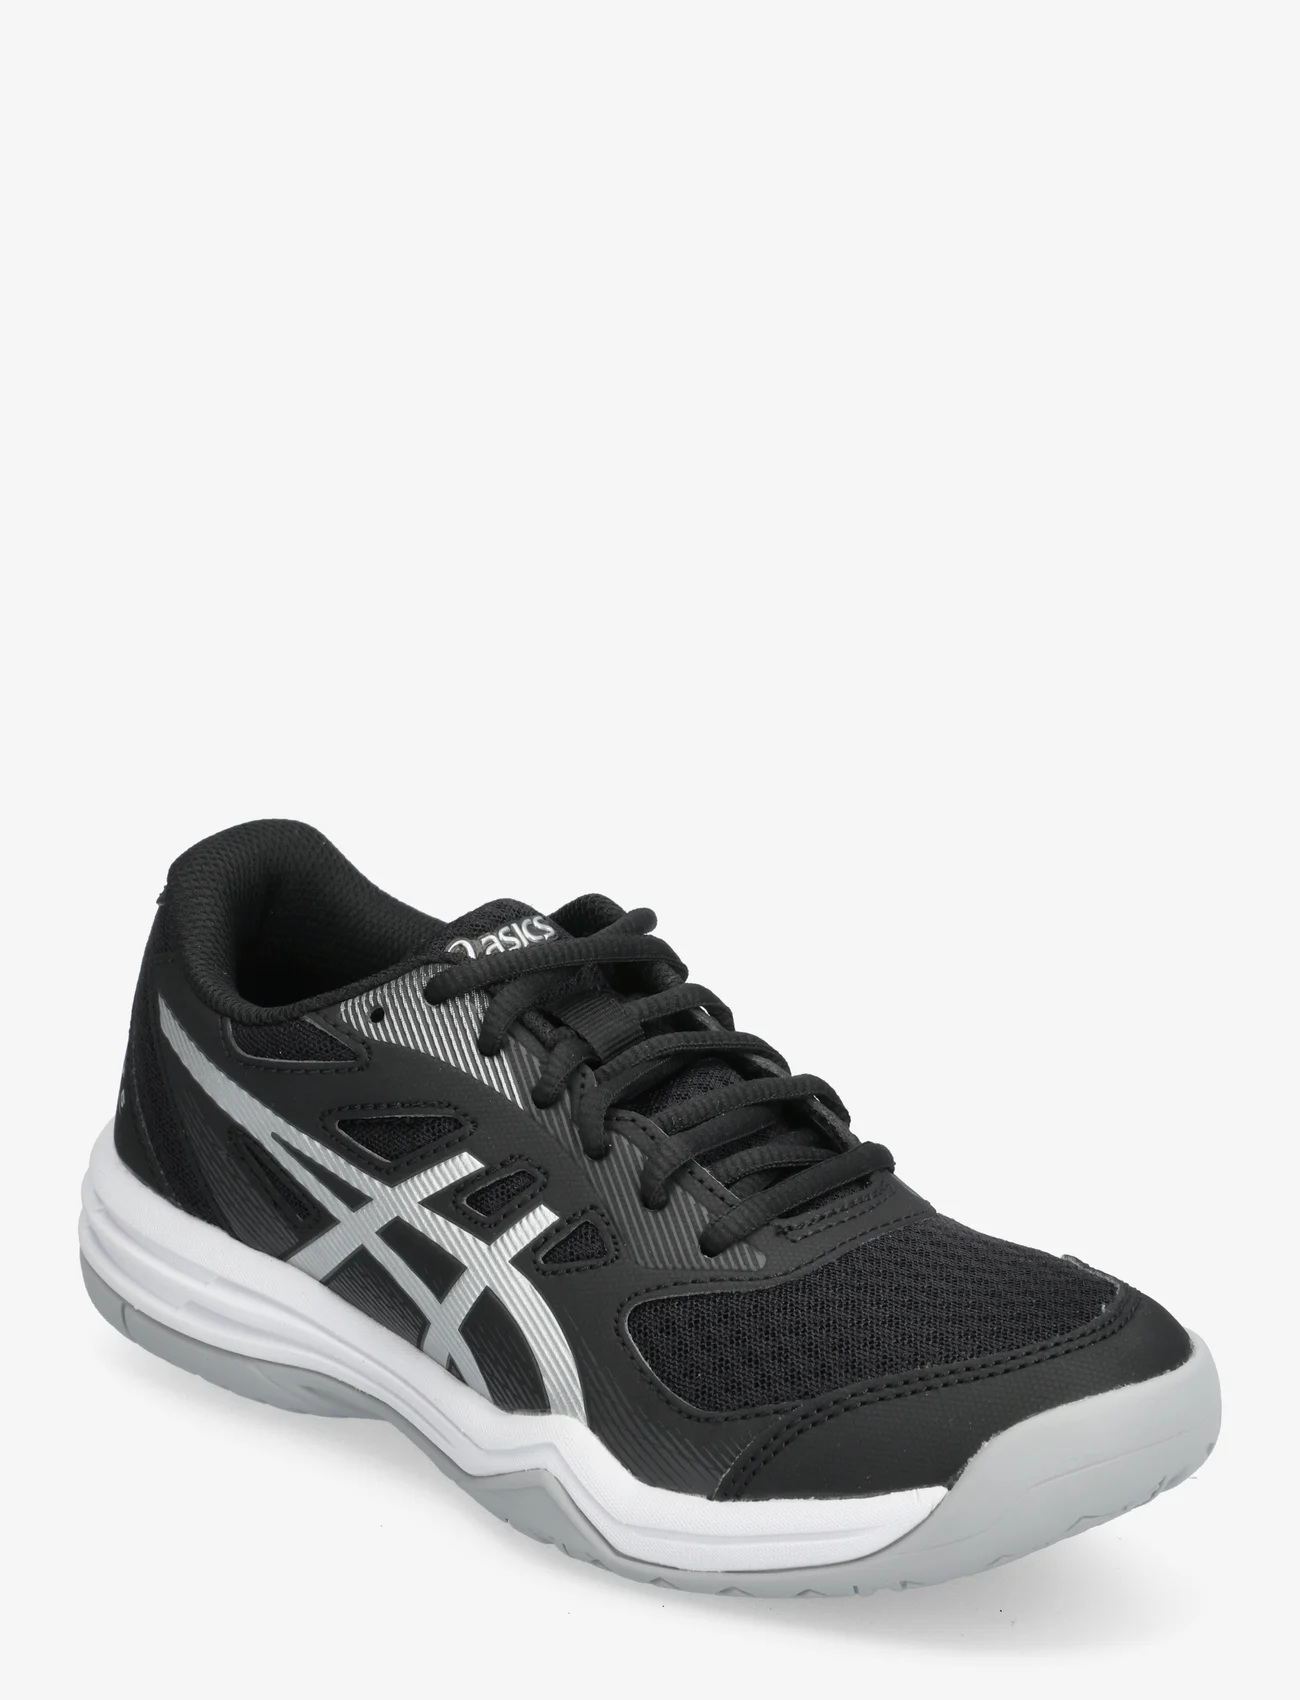 Asics - UPCOURT 5 - indoor sports shoes - black/pure silver - 0